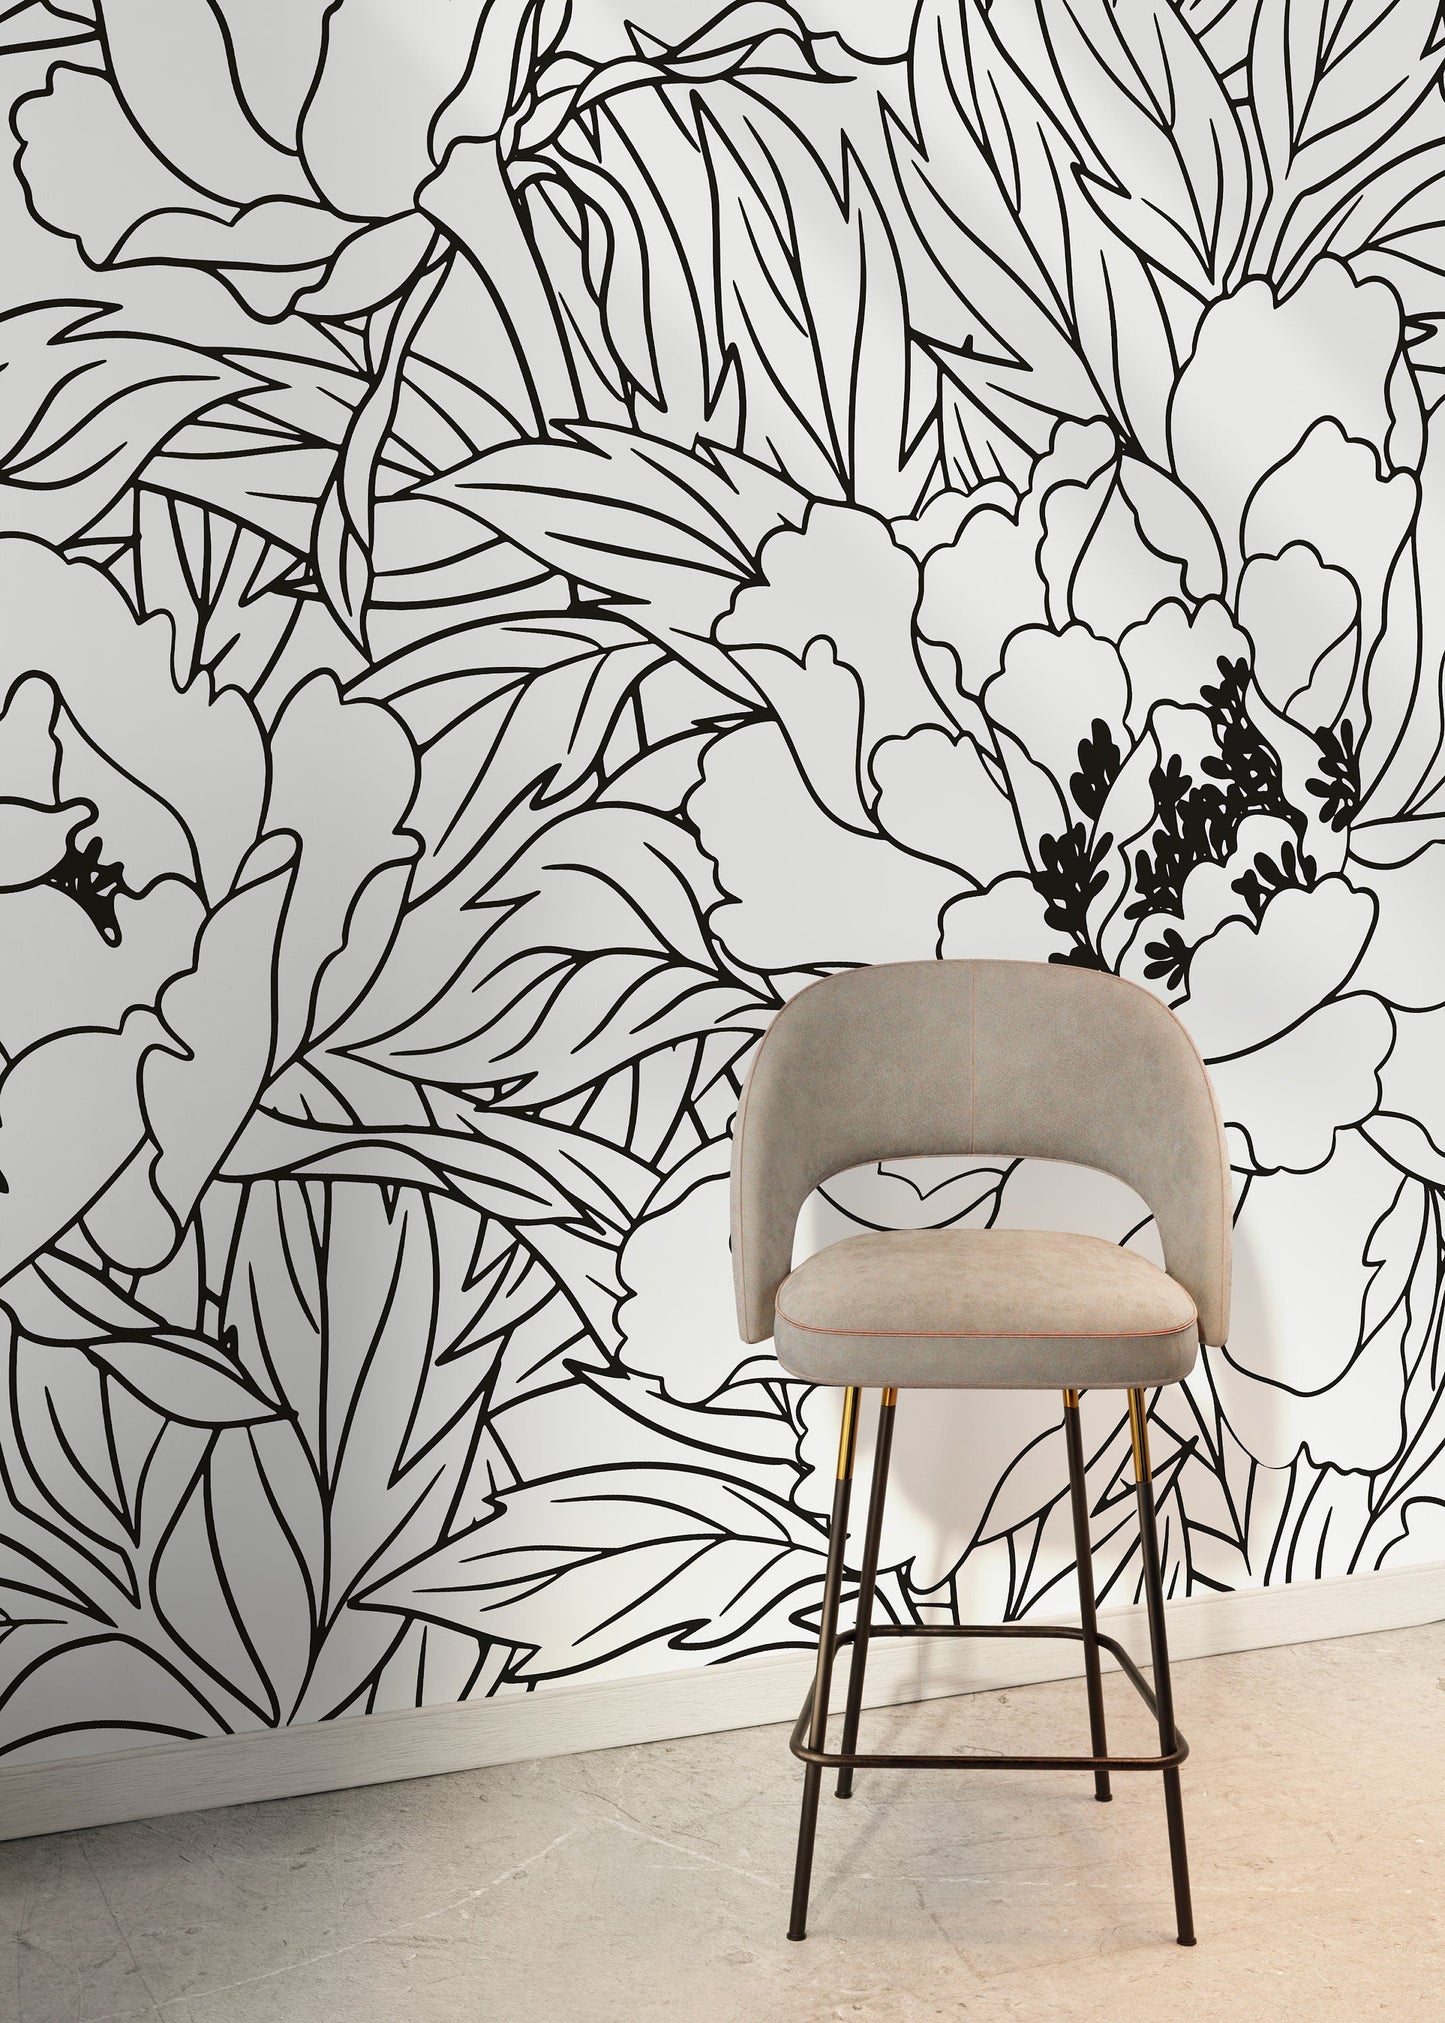 Black and White Large Floral / Wallpaper Peel and Stick Wallpaper Removable Wallpaper Home Decor Wall Art Wall Decor Room Decor - C919